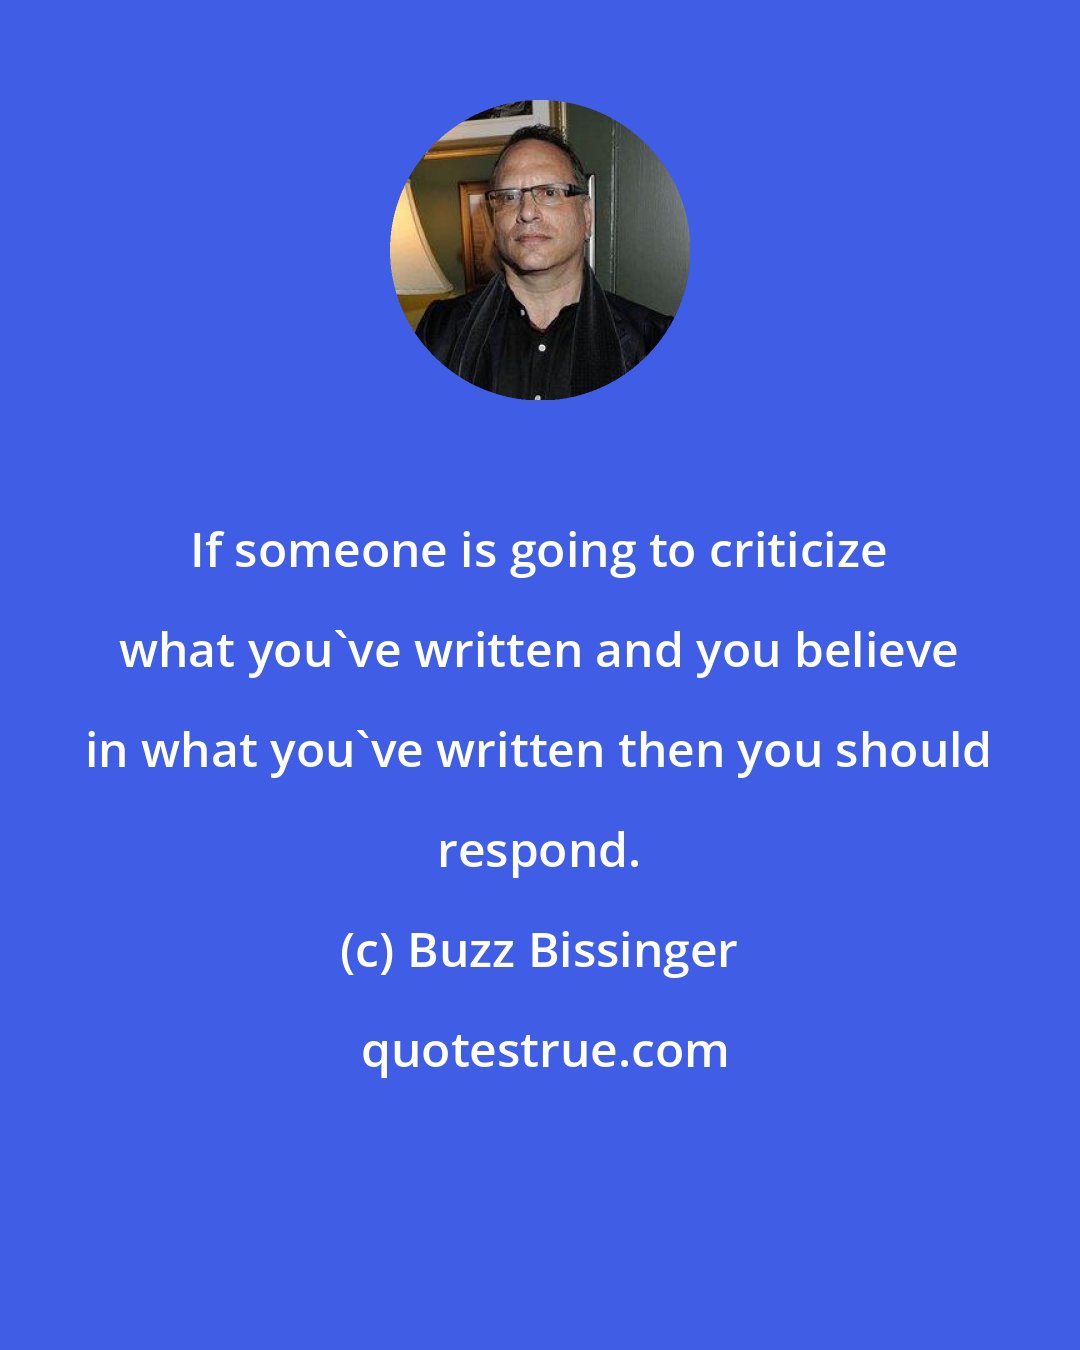 Buzz Bissinger: If someone is going to criticize what you've written and you believe in what you've written then you should respond.